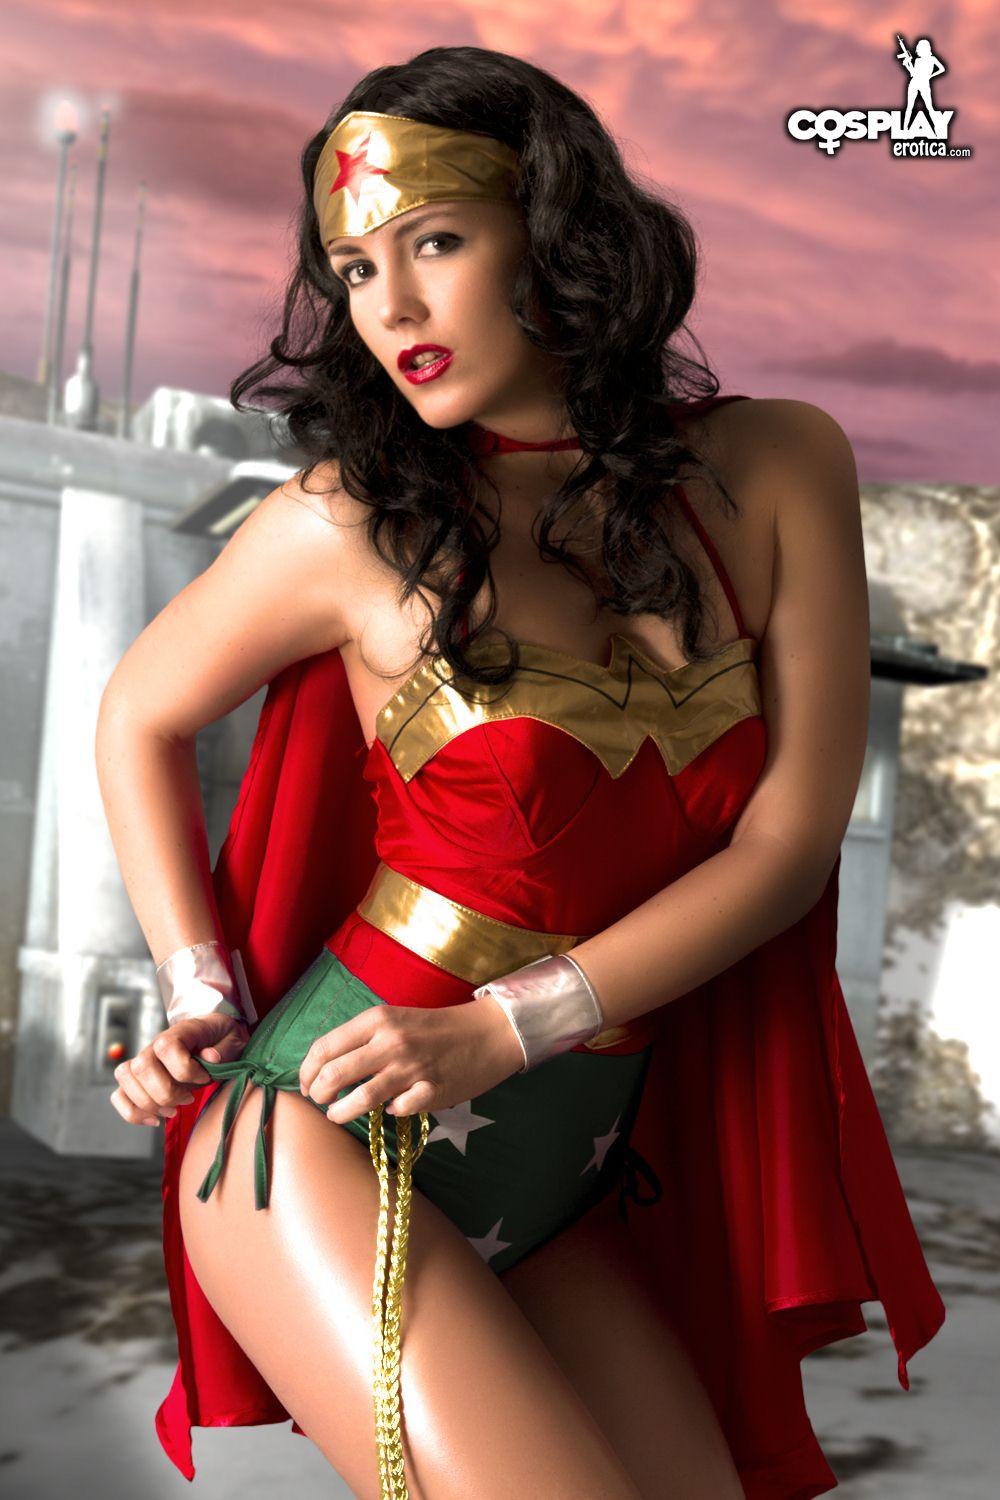 Pictures of stunning cosplayer Gogo dressed up as Wonder Woman #54559906